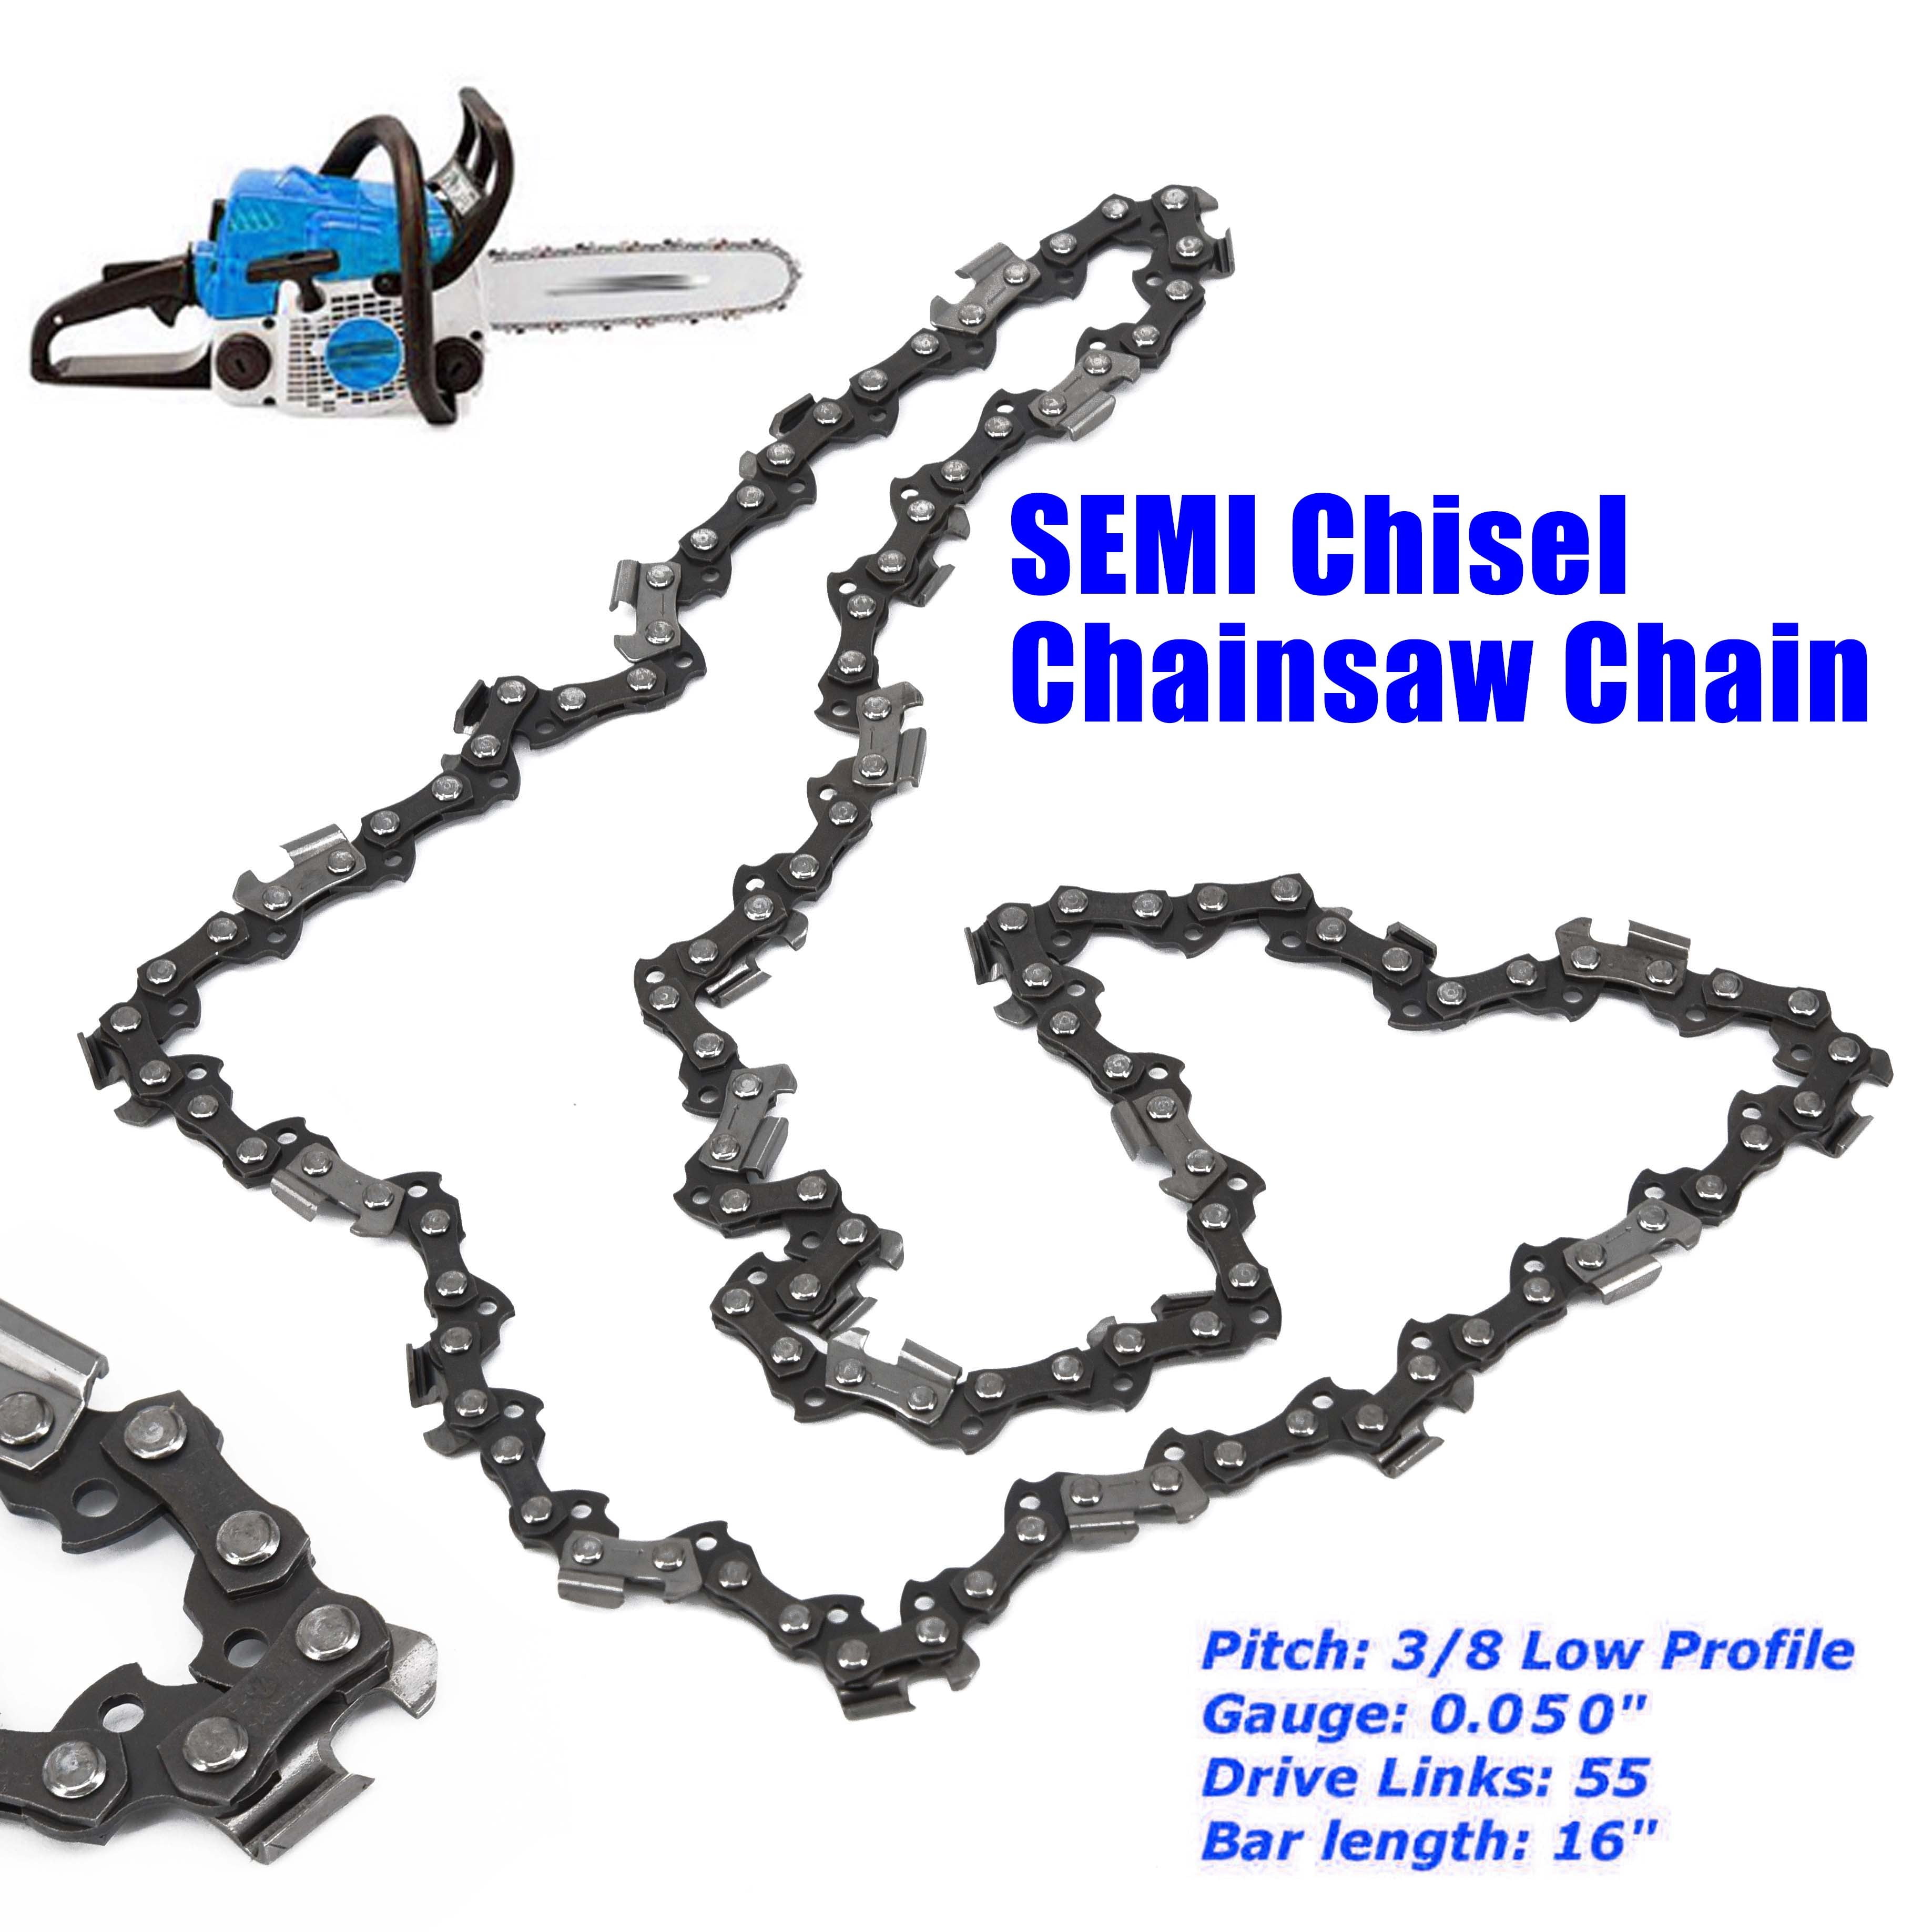 STIHL 3/8 Pitch PS RACING CHAIN 20 inch Cannon 72 drivers full chisel .050 gauge 